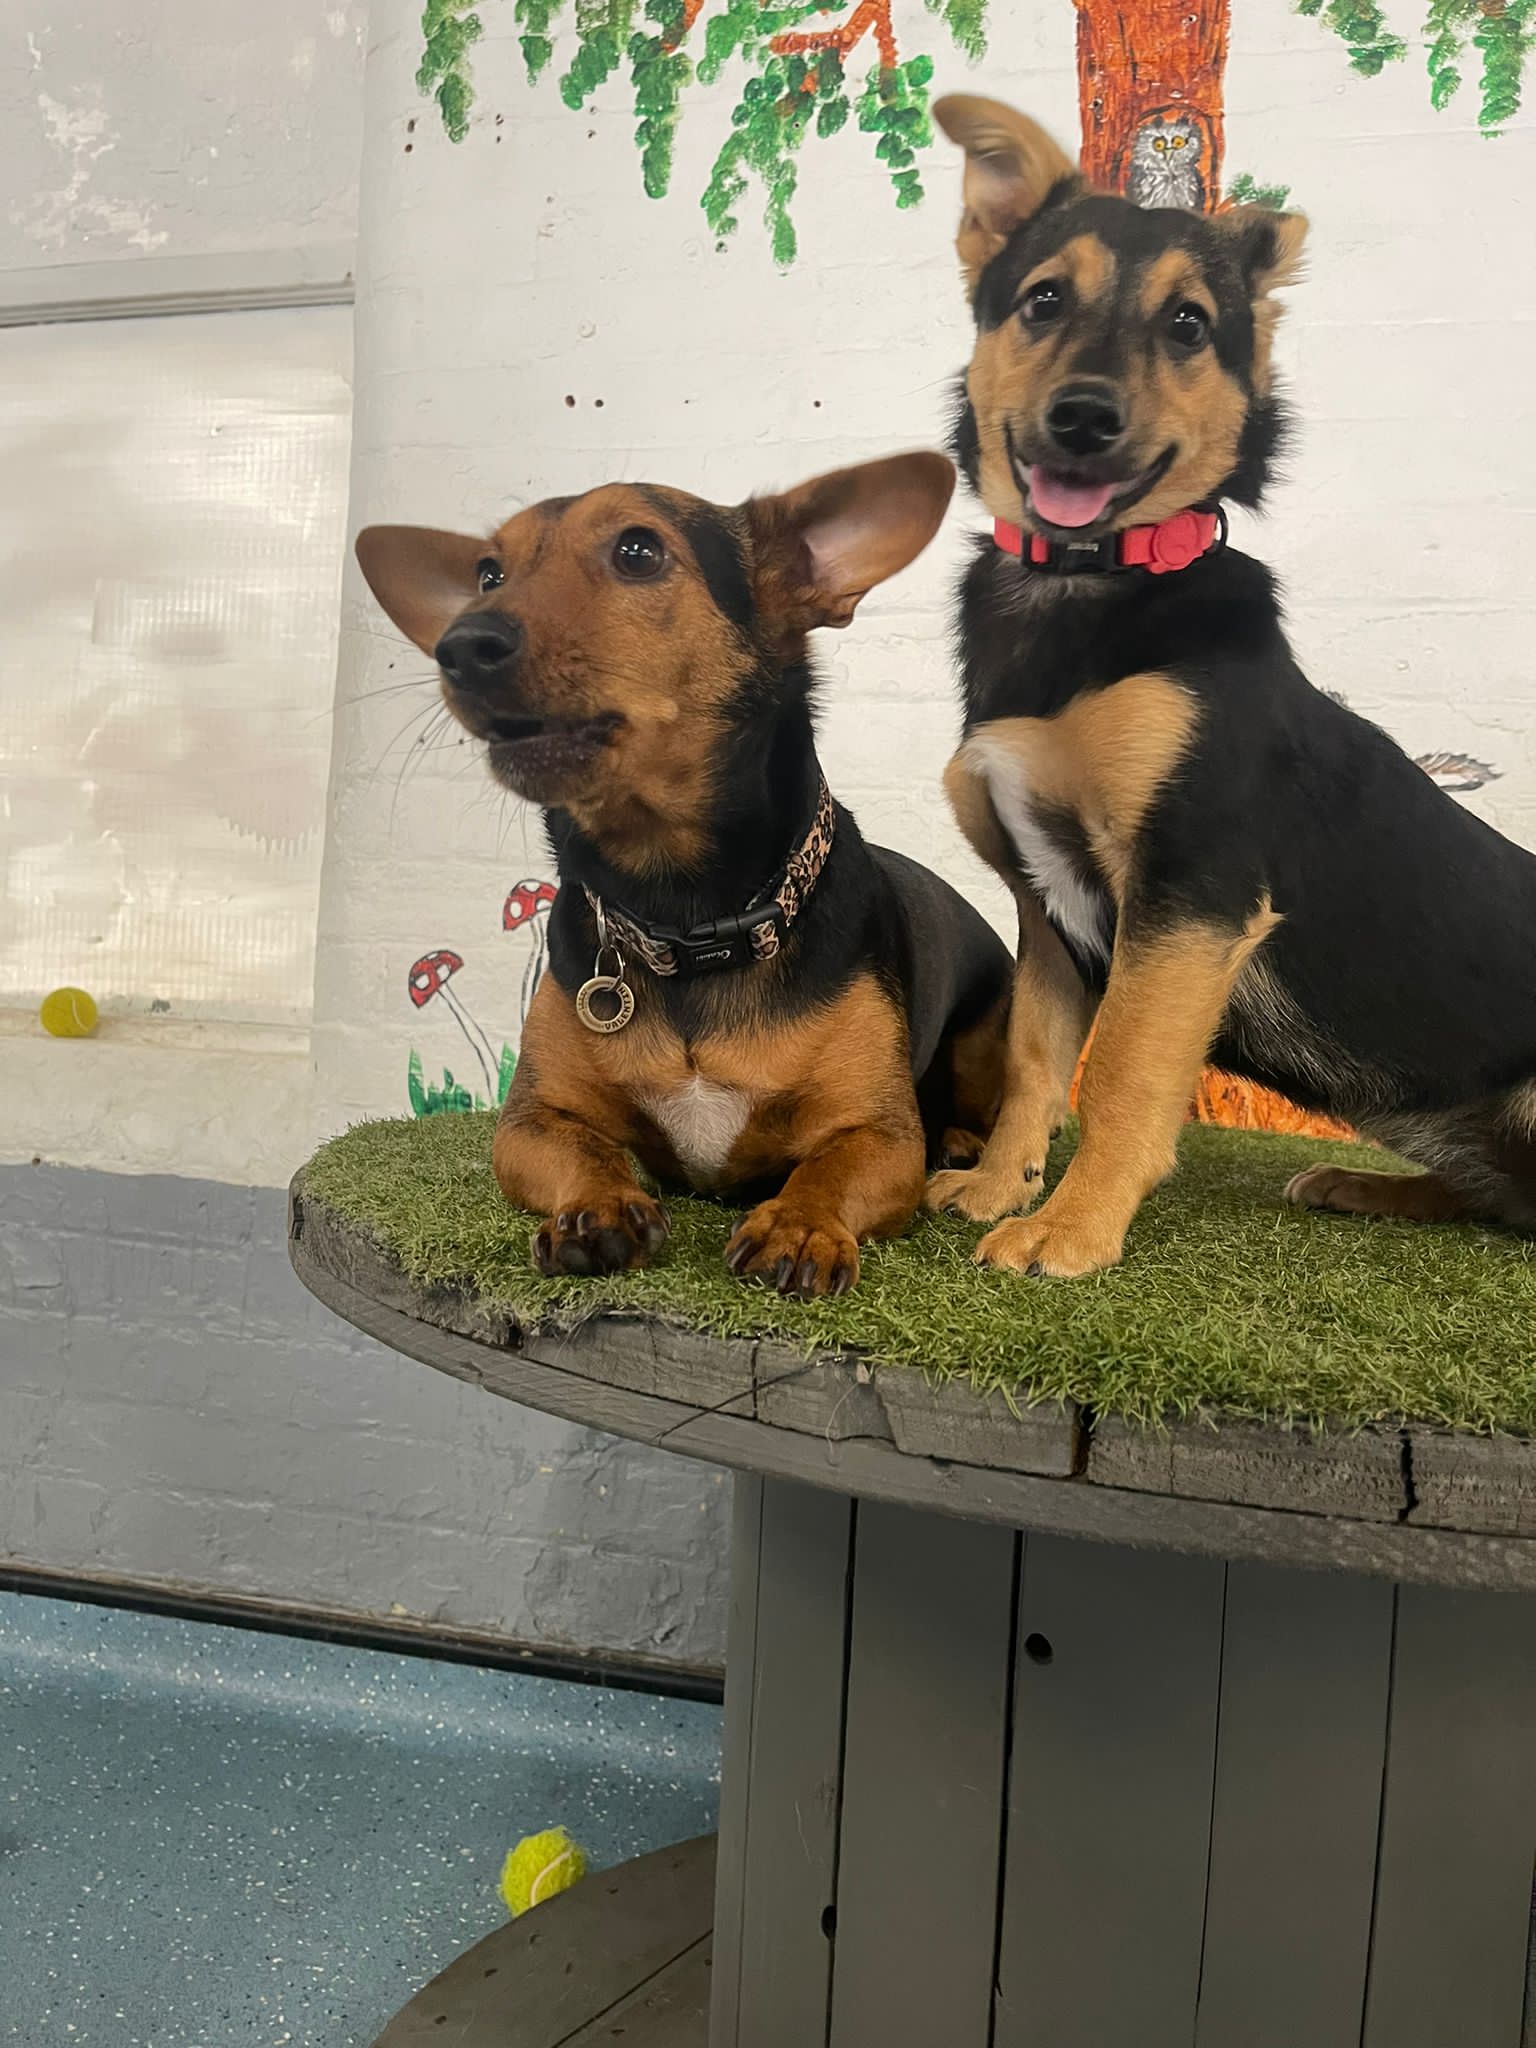 Cookie the puppy sitting on a raised fake grass bed, next to Valentine the Dashund who is looking away from the camera. Cookie is beaming at the camera, with her mouth slightly open and her tongue slightly sticking out.